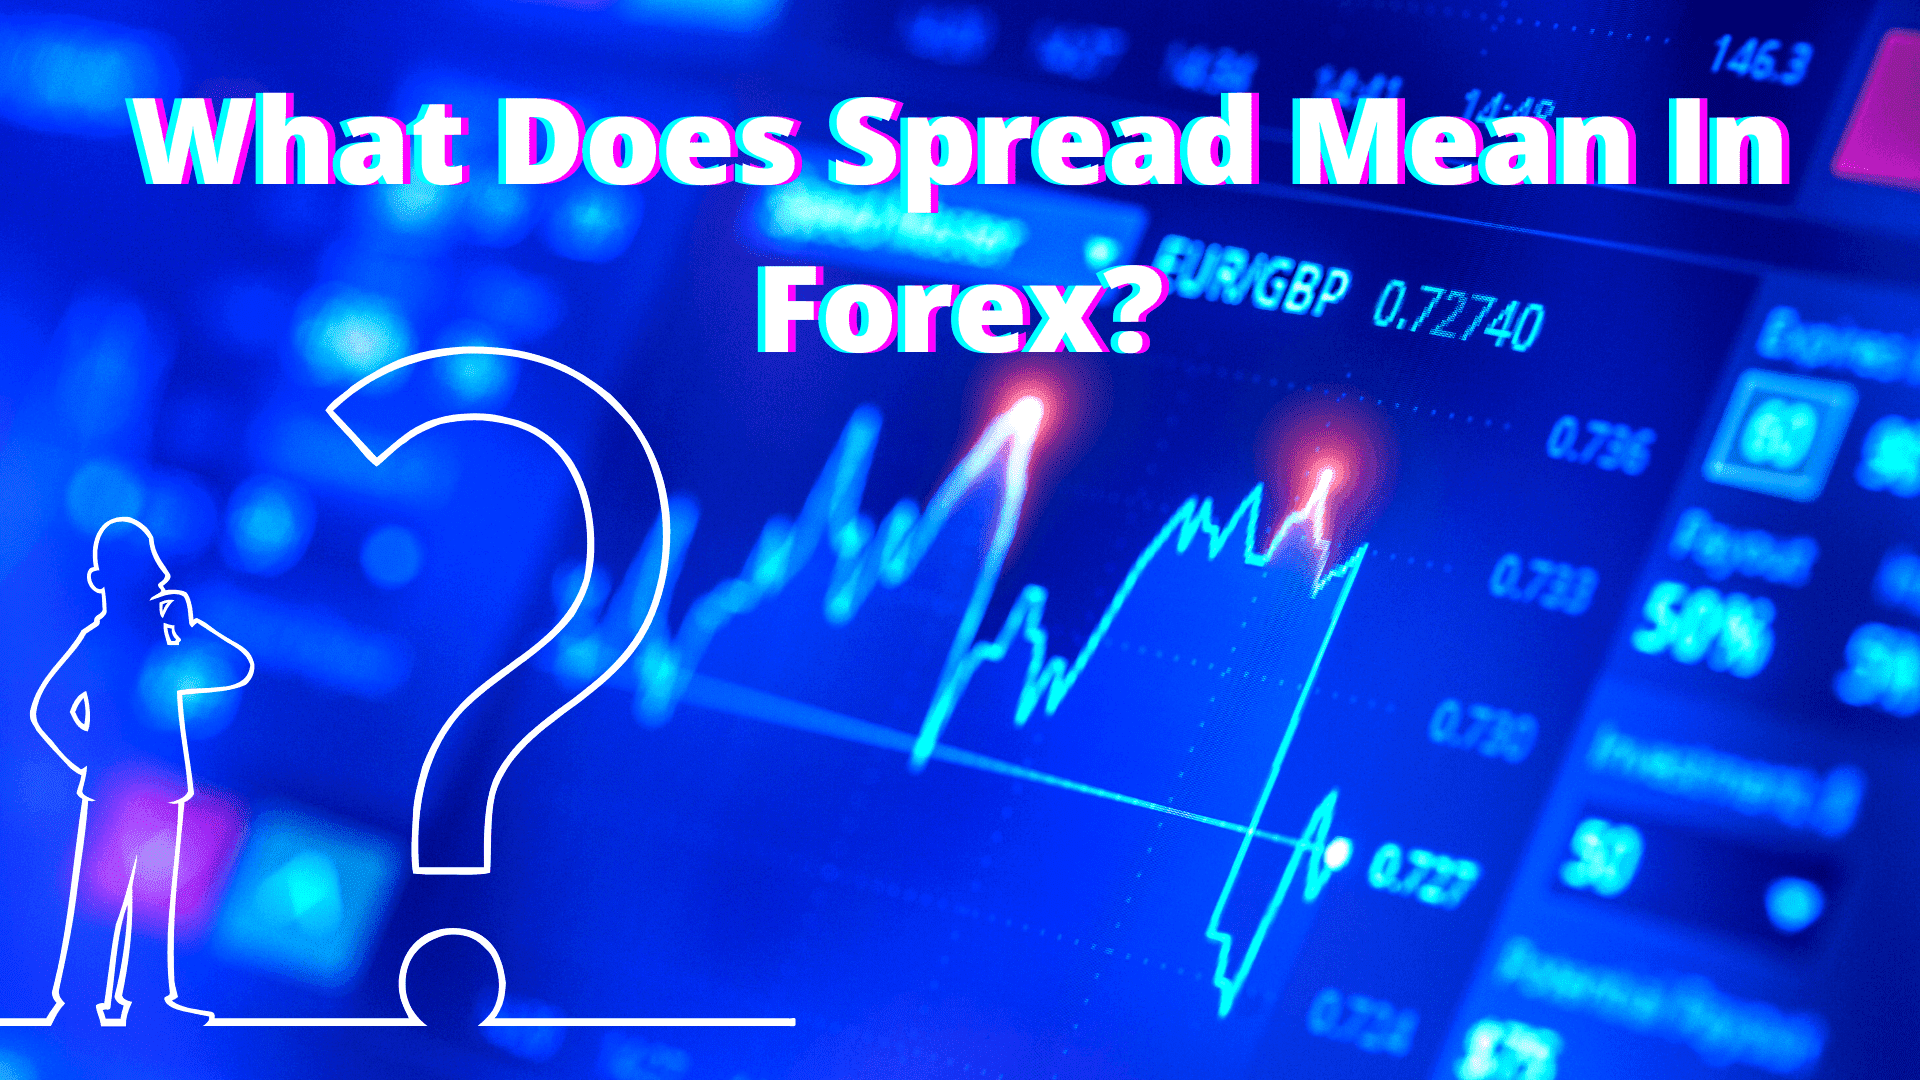 What Does Spread Mean In Forex